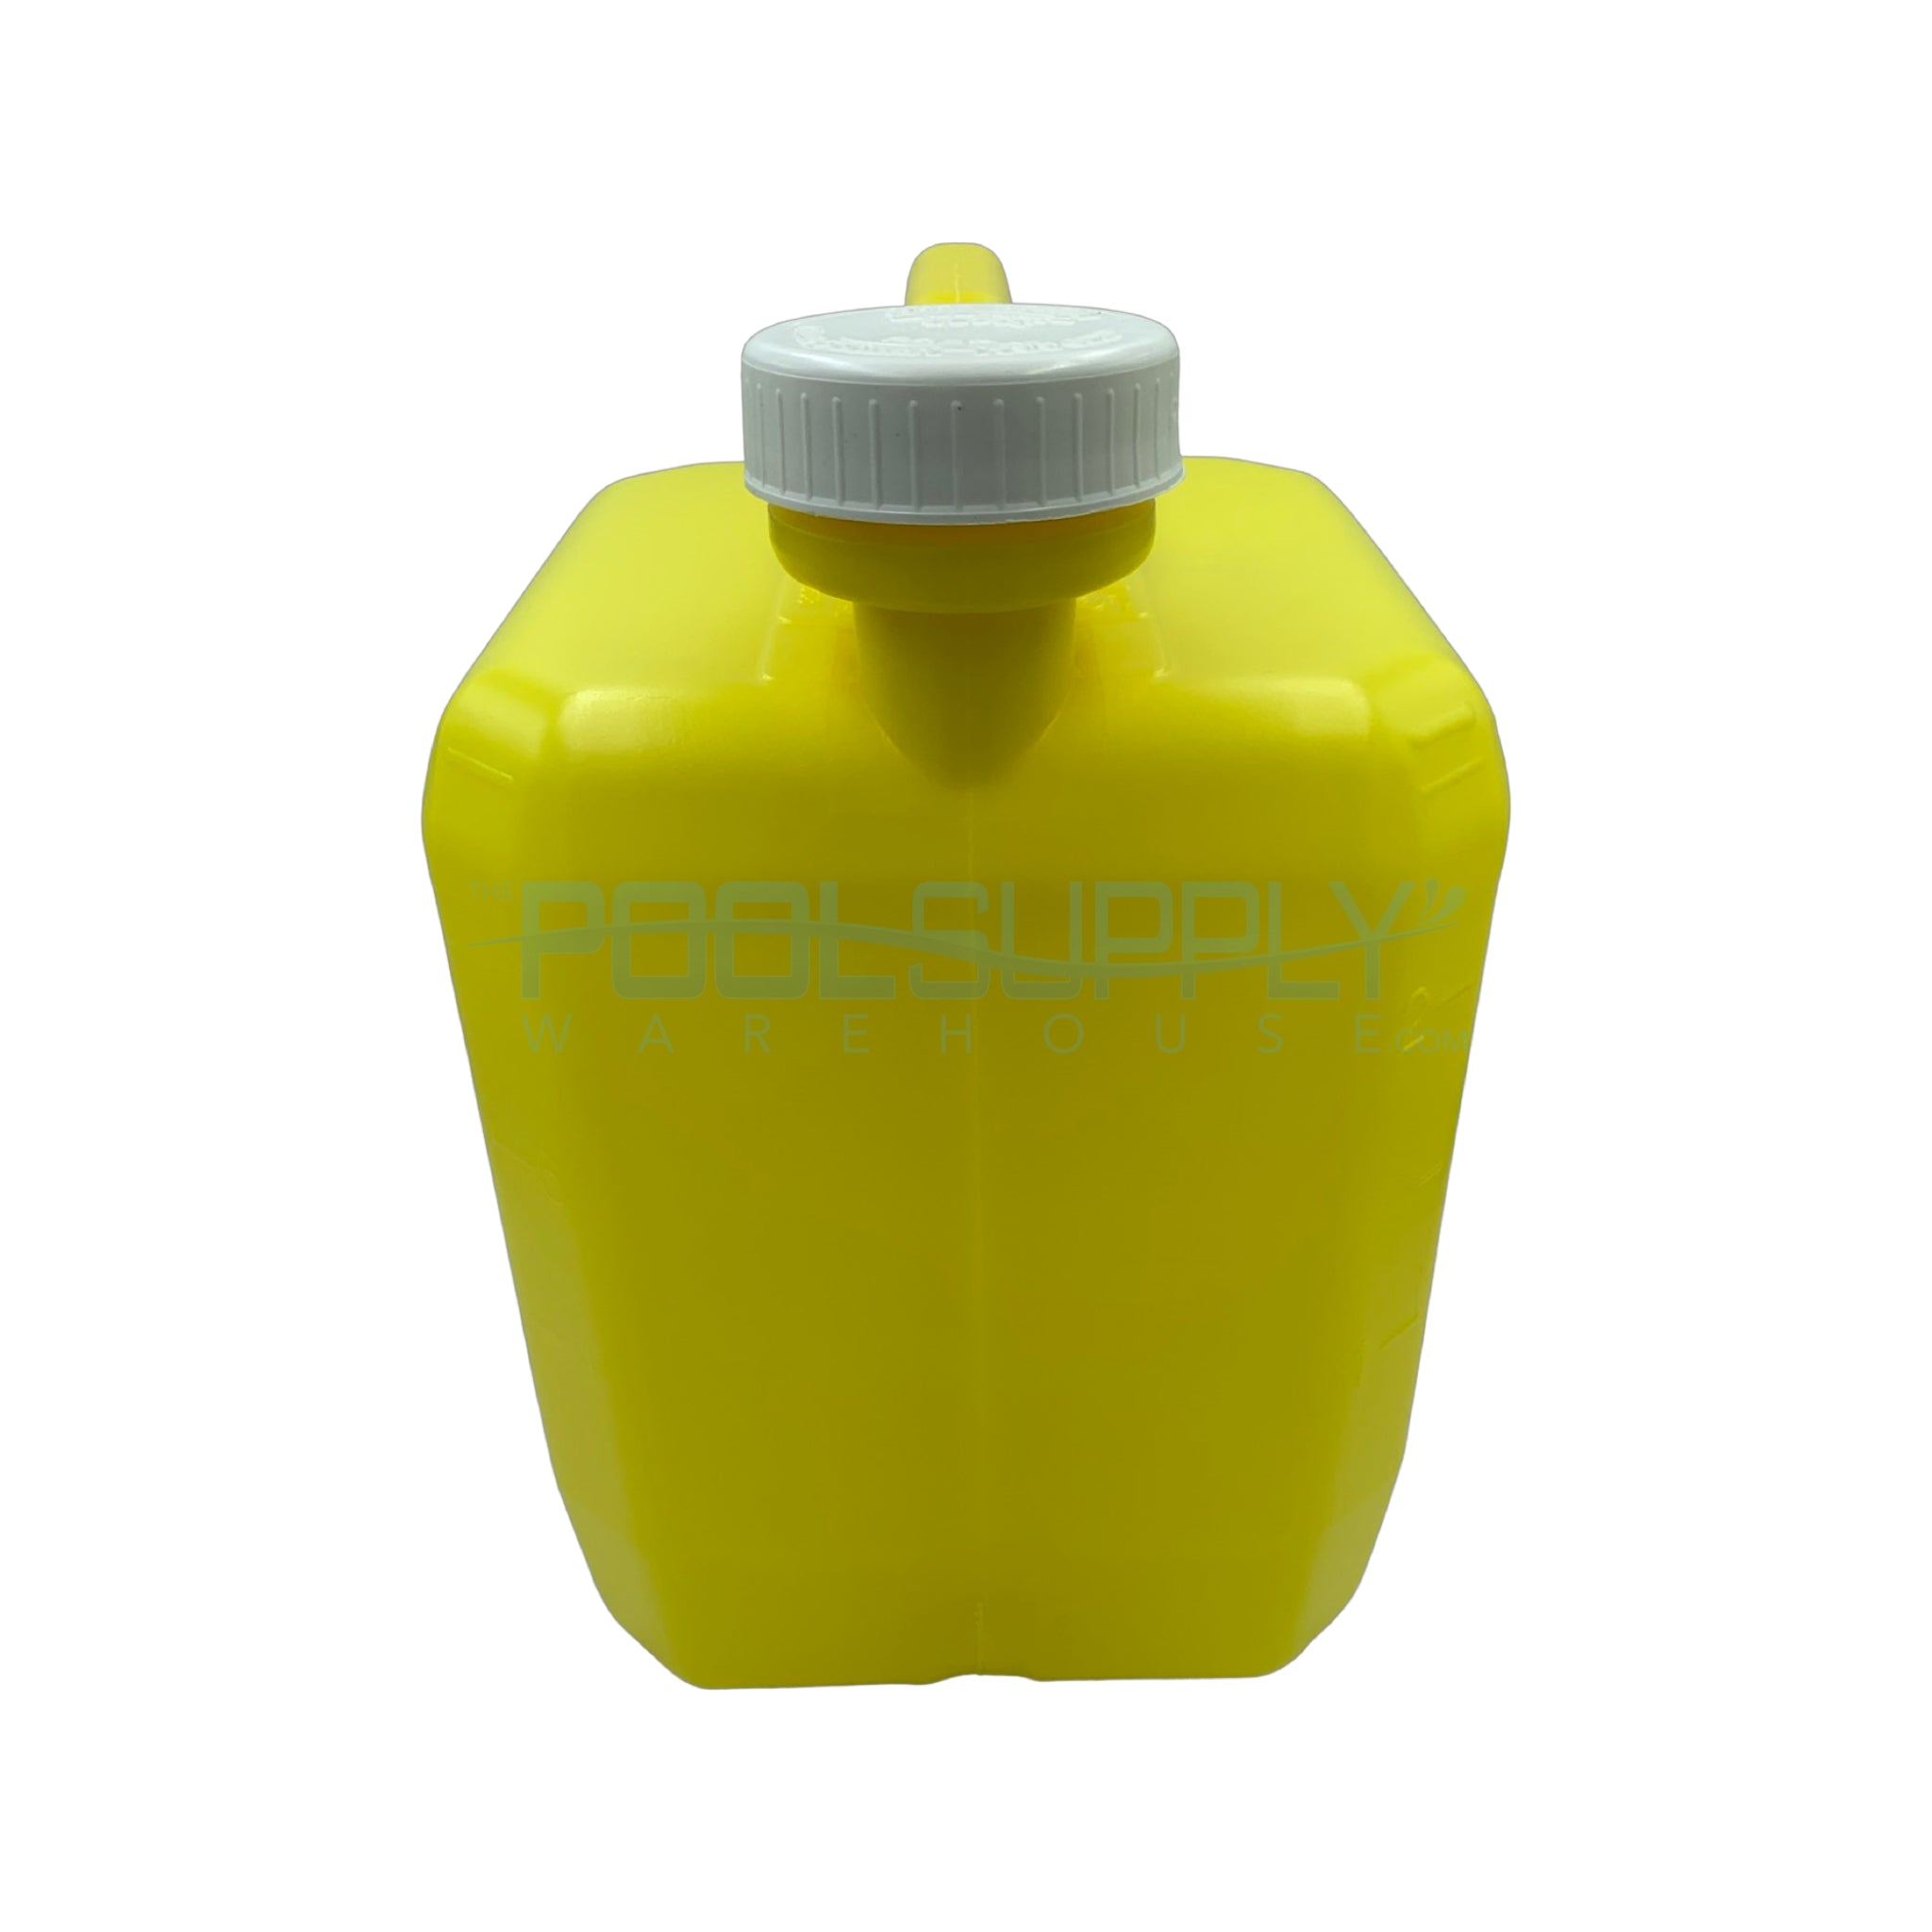 Chlorine 2.5 Gallon Empty Jug Only With Cap - 9210505003000 